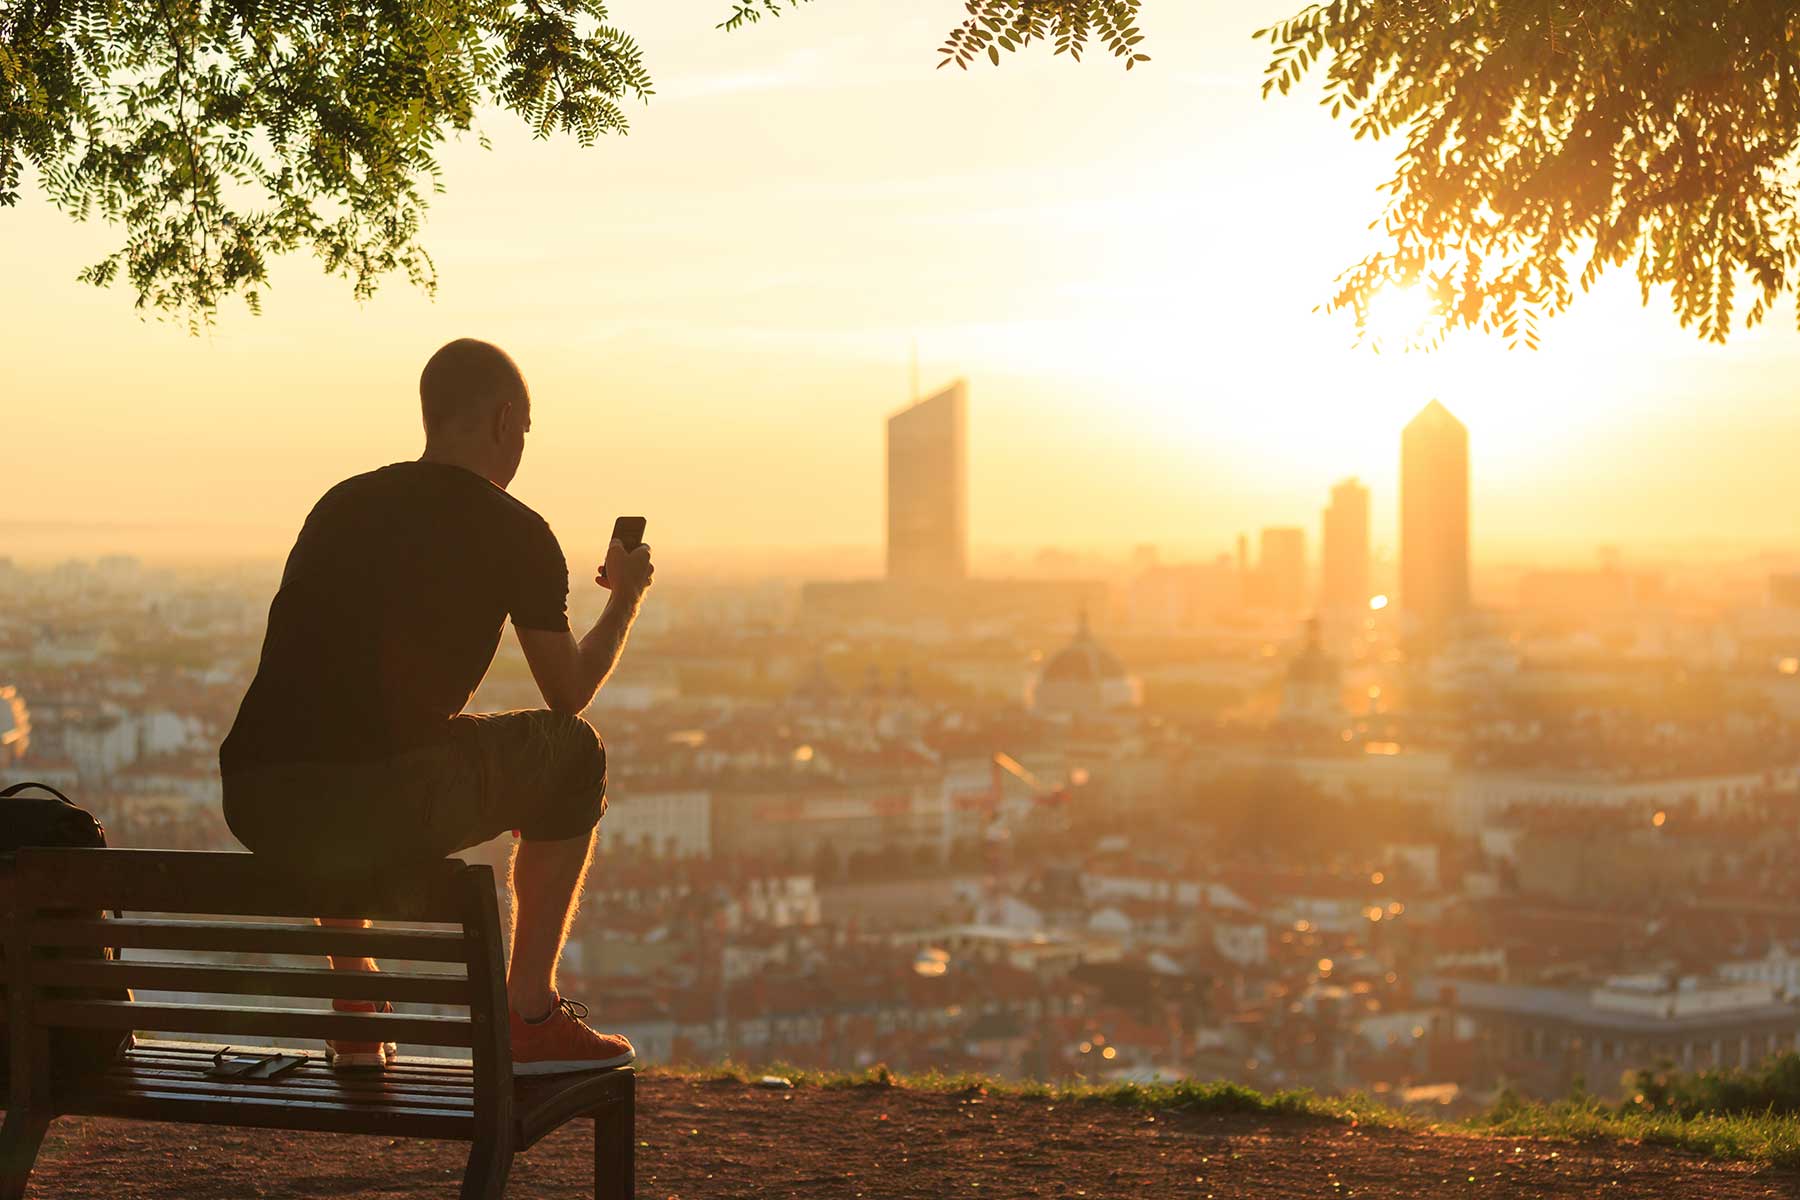 Person on phone enjoying beautiful view of the city and sunset while in one of the stages of recovery from substance use disorder